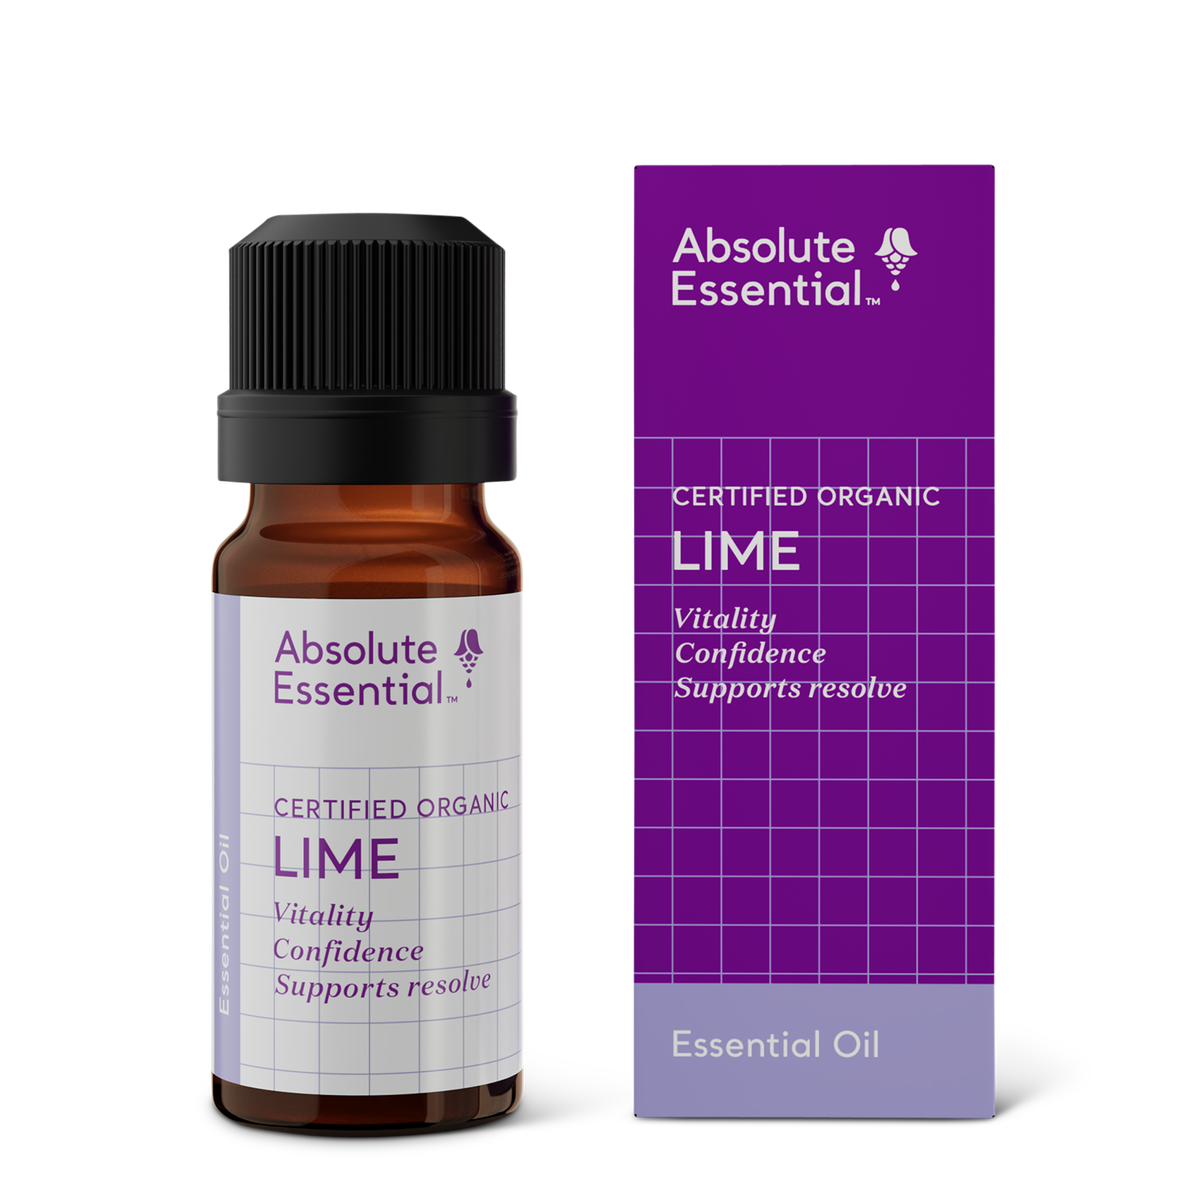 Absolute Essential Lime Oil